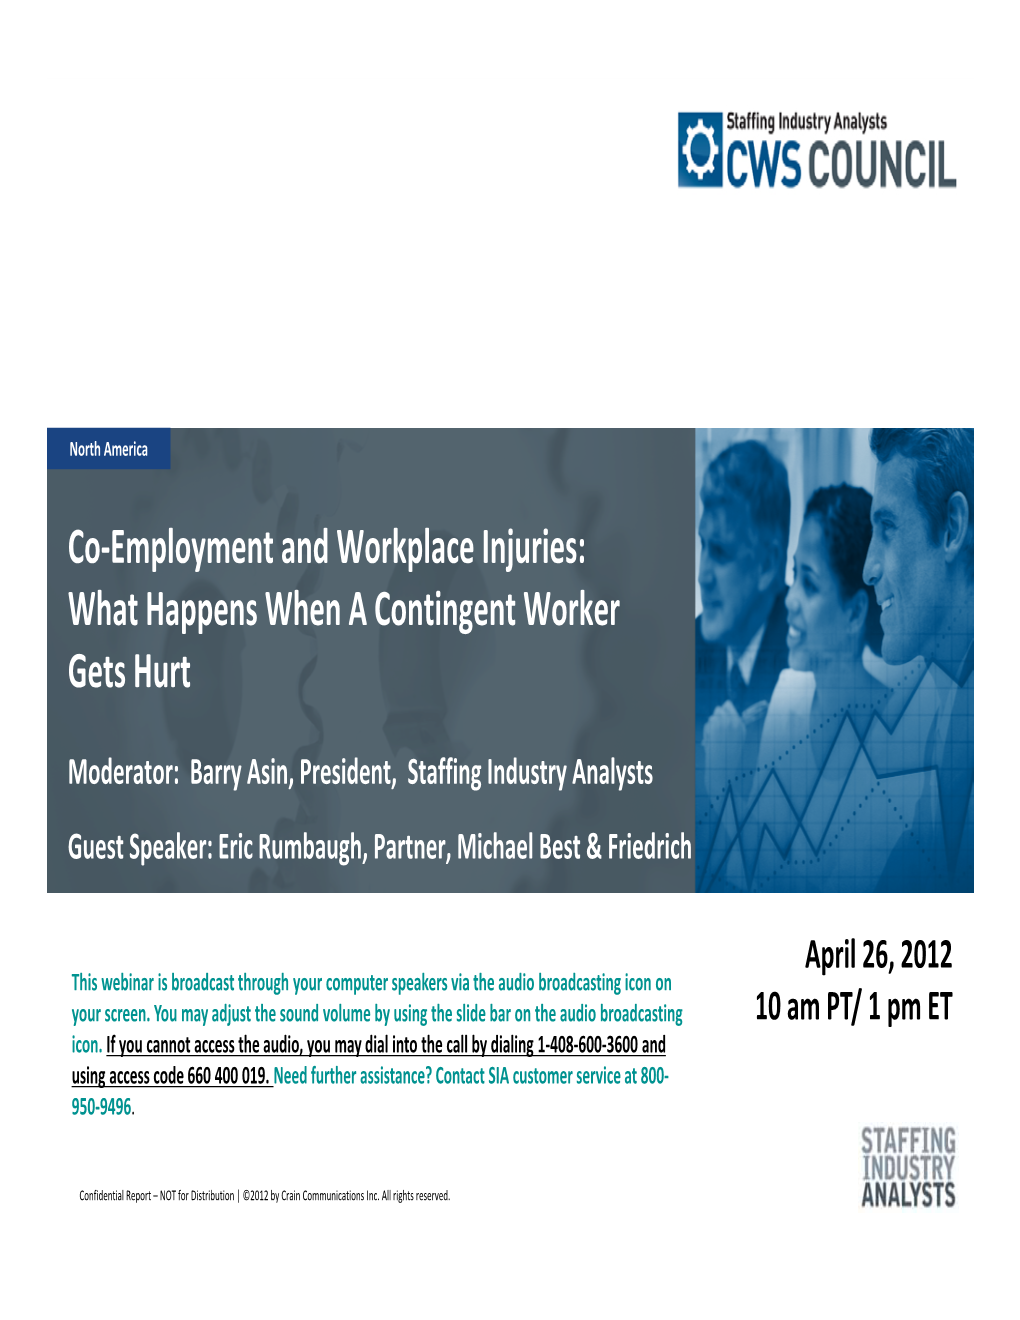 Co-Employment and Workplace Injuries: What Happens When a Contingent Worker Gets Hurt